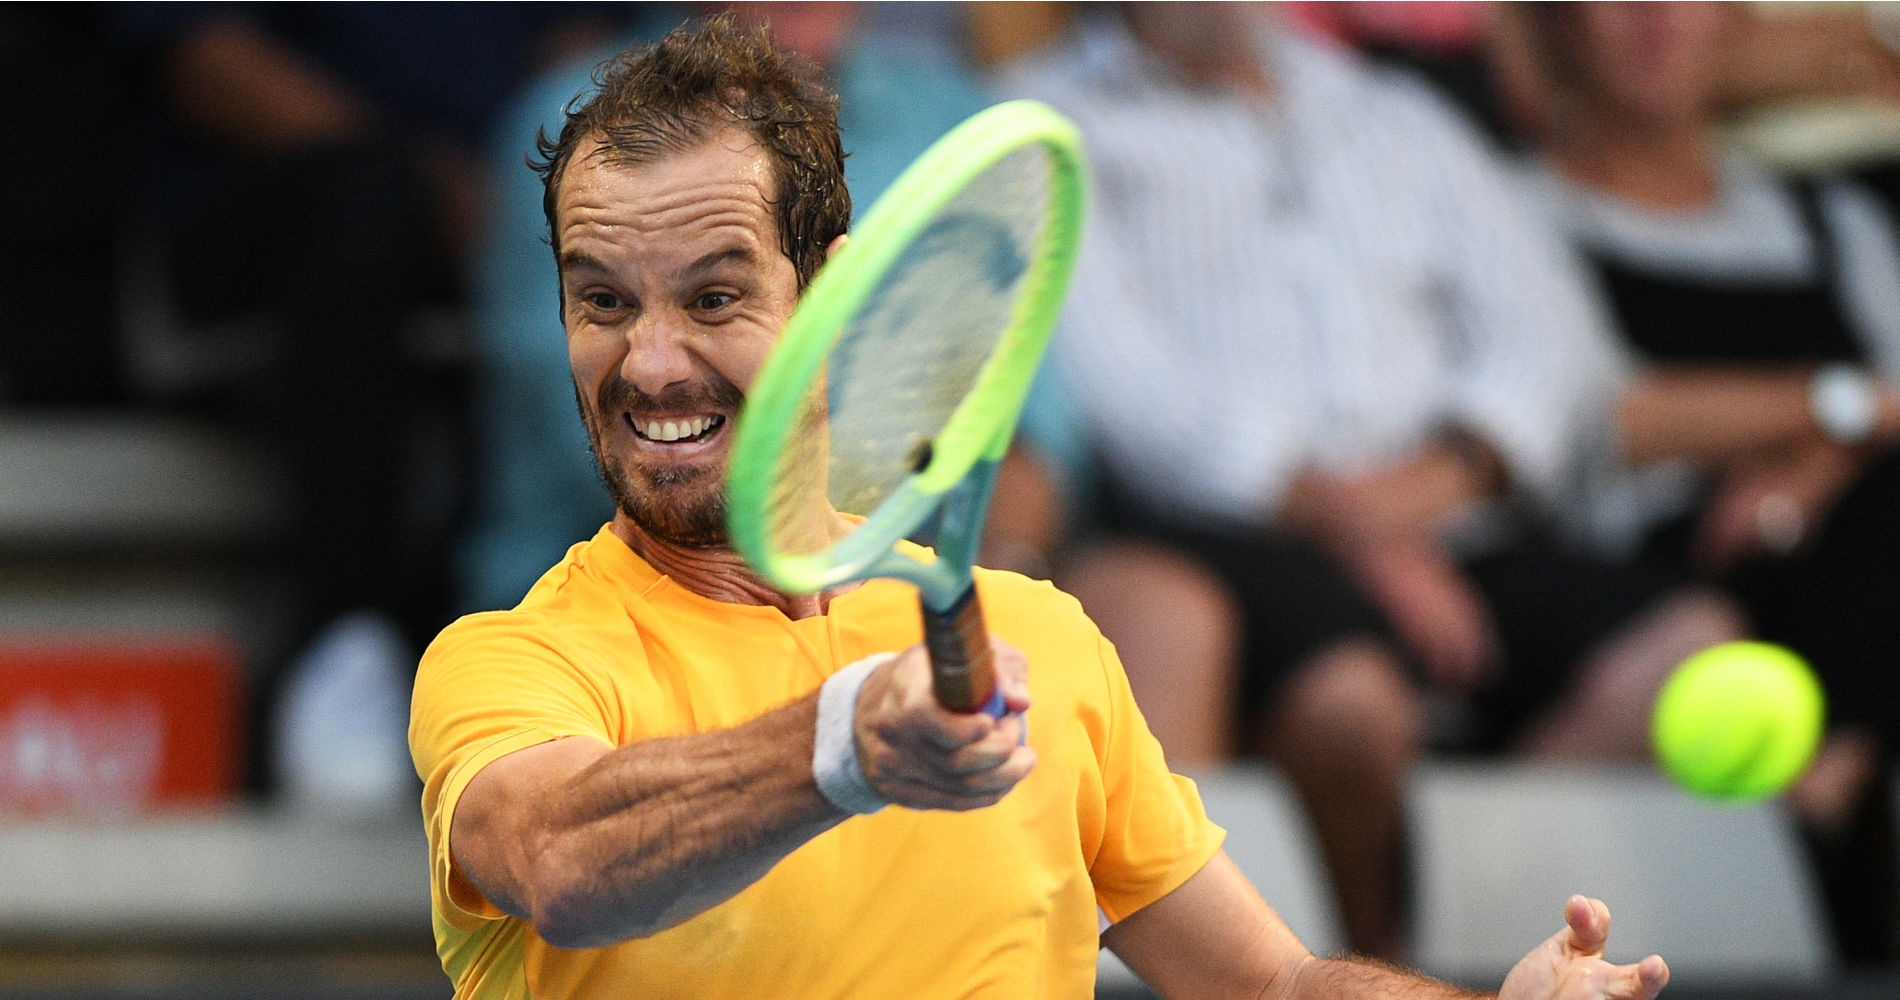 Everything you wanted to know about Gasquet